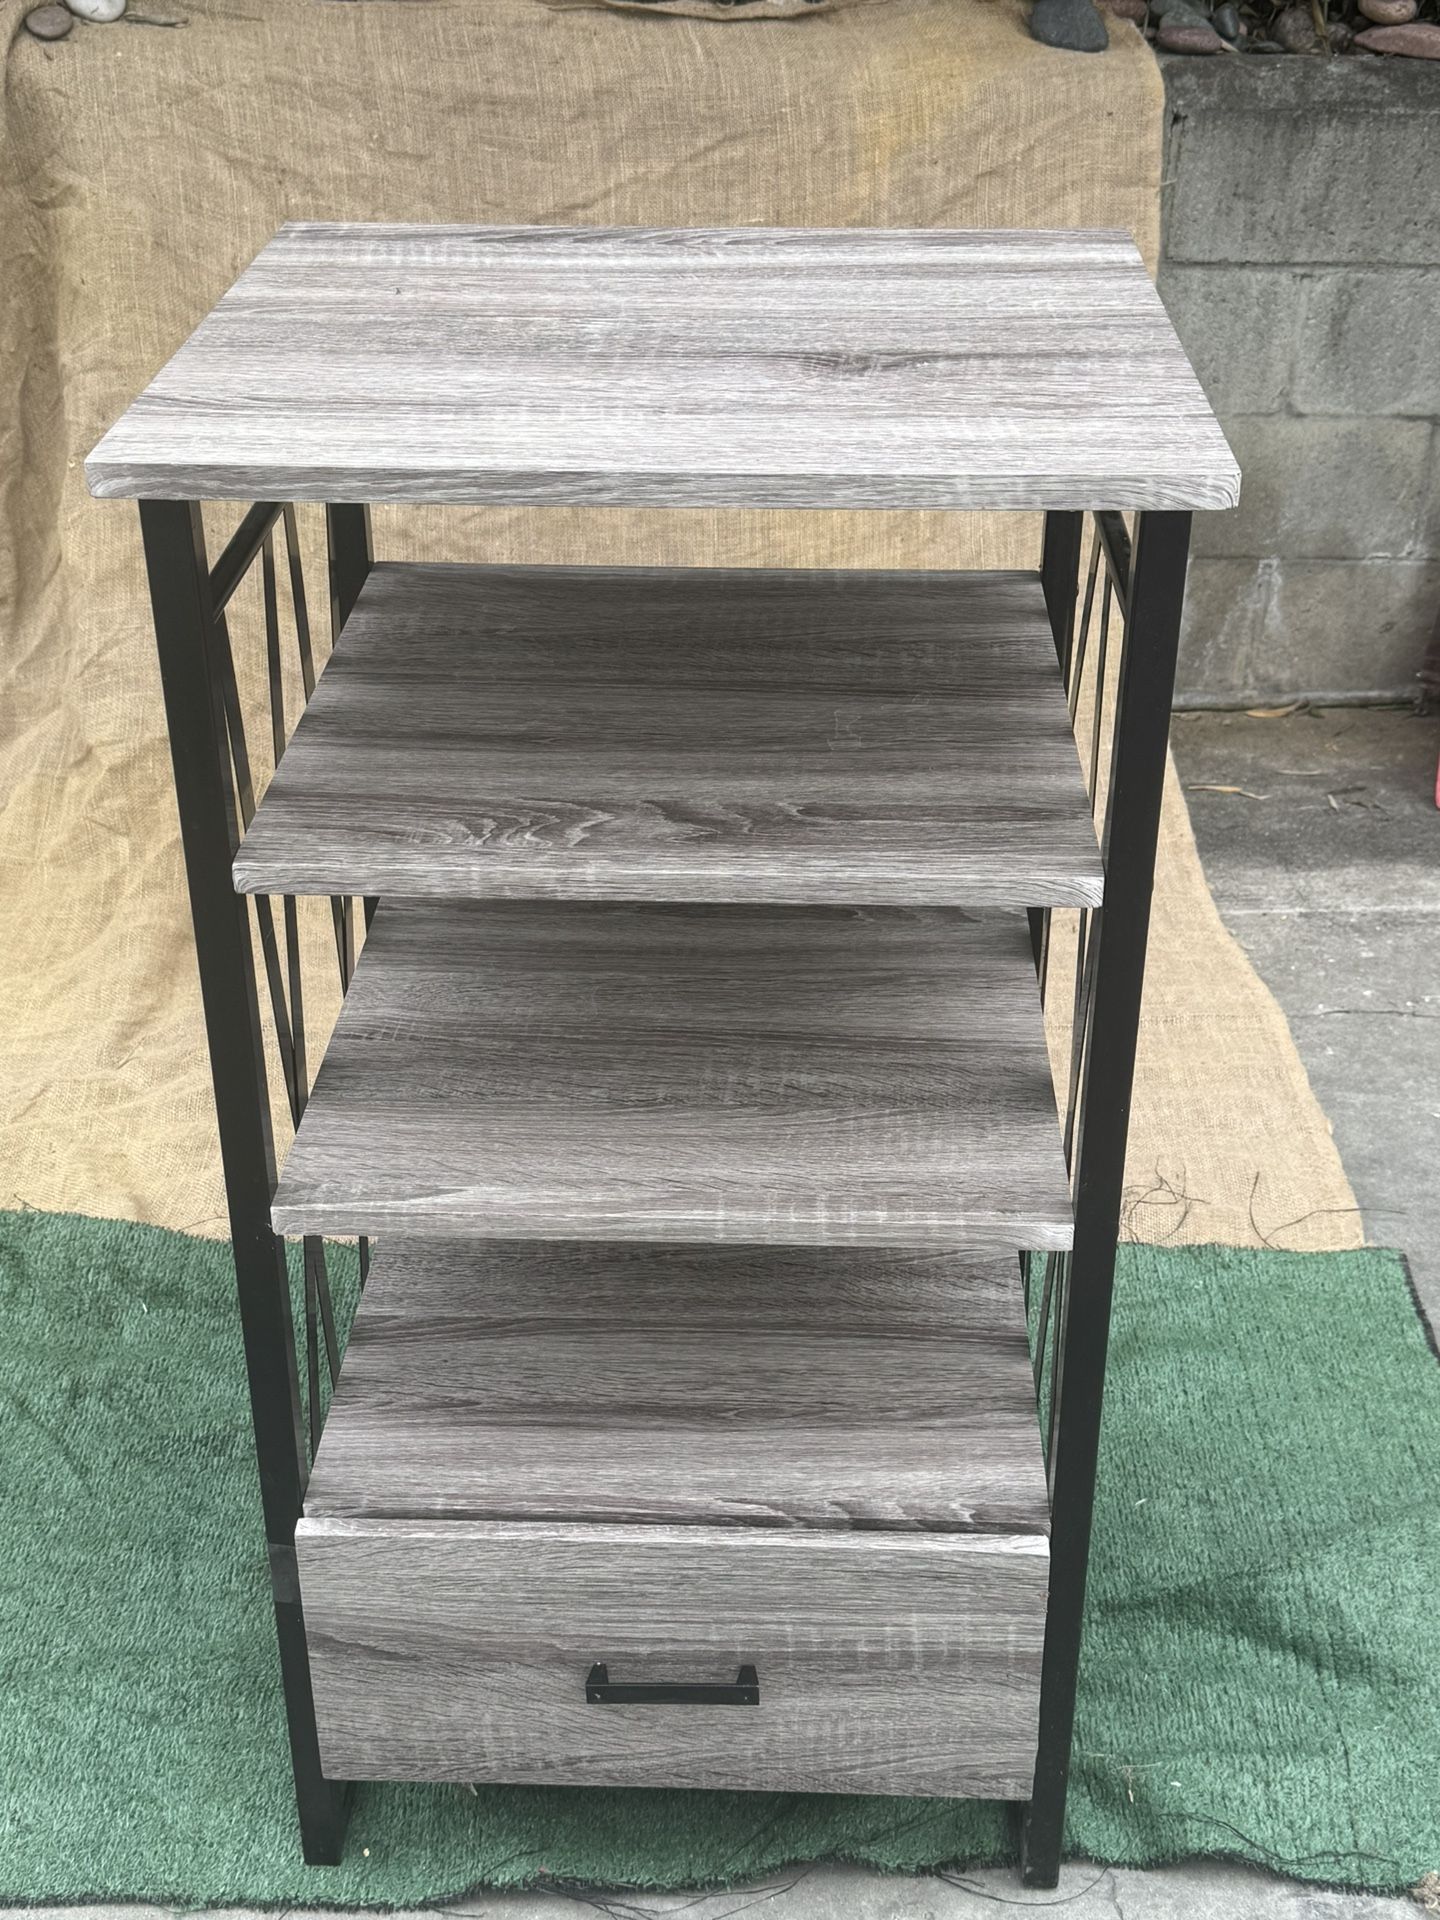 Display Cabinet And Book Shelf With 3 Levels And Drawer For Special Item Storage